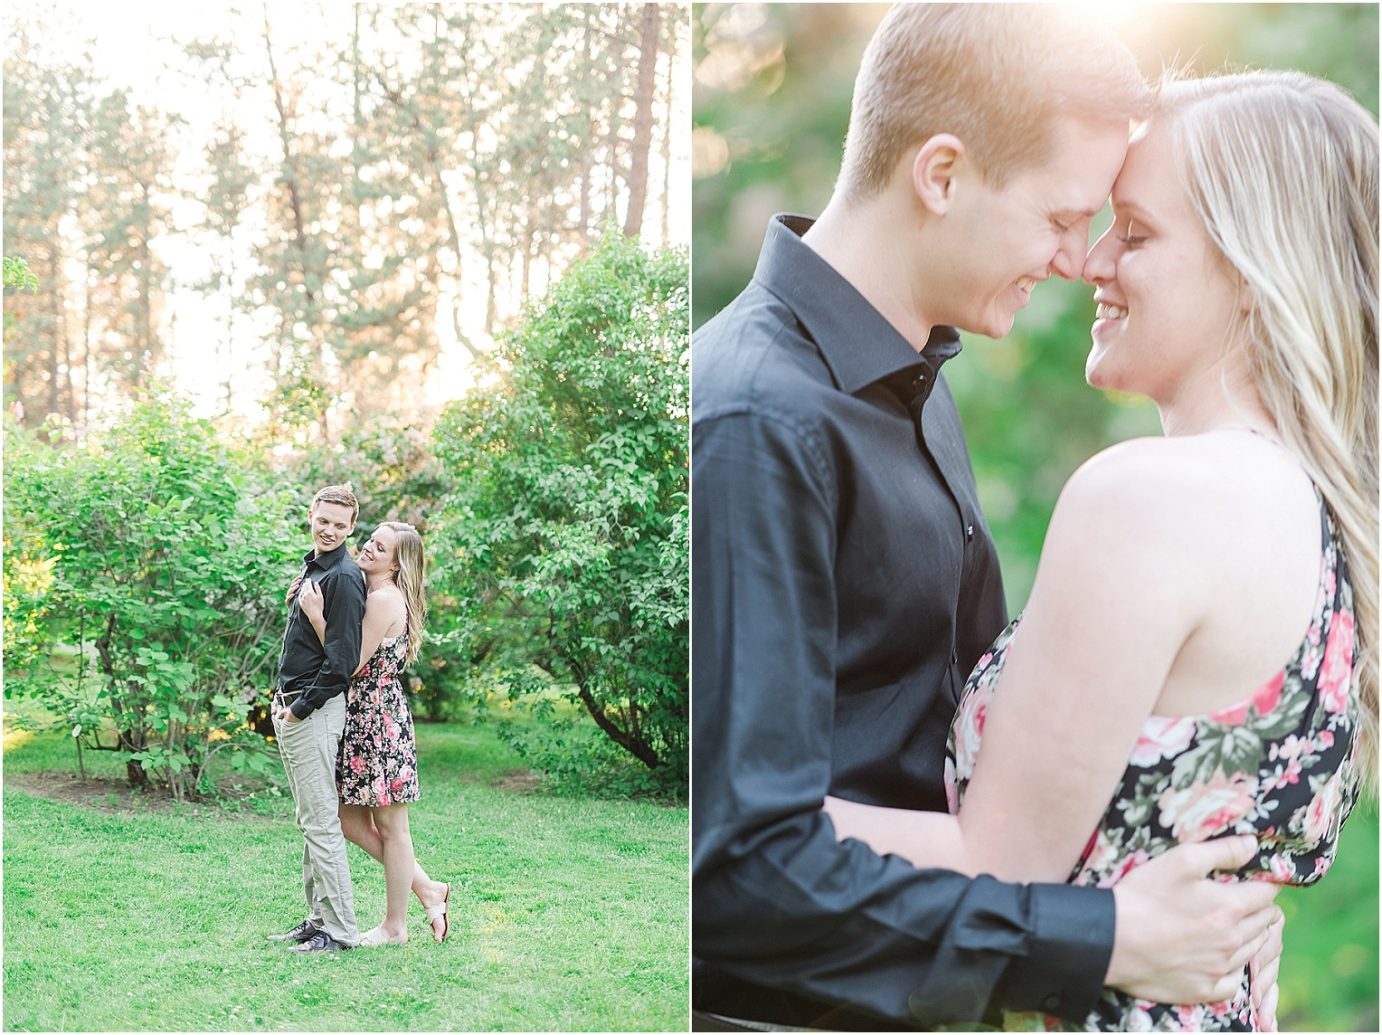 Manito Park Engagement Session Spokane Photographer Bryan and Olivia snuggling in grove of lilacs